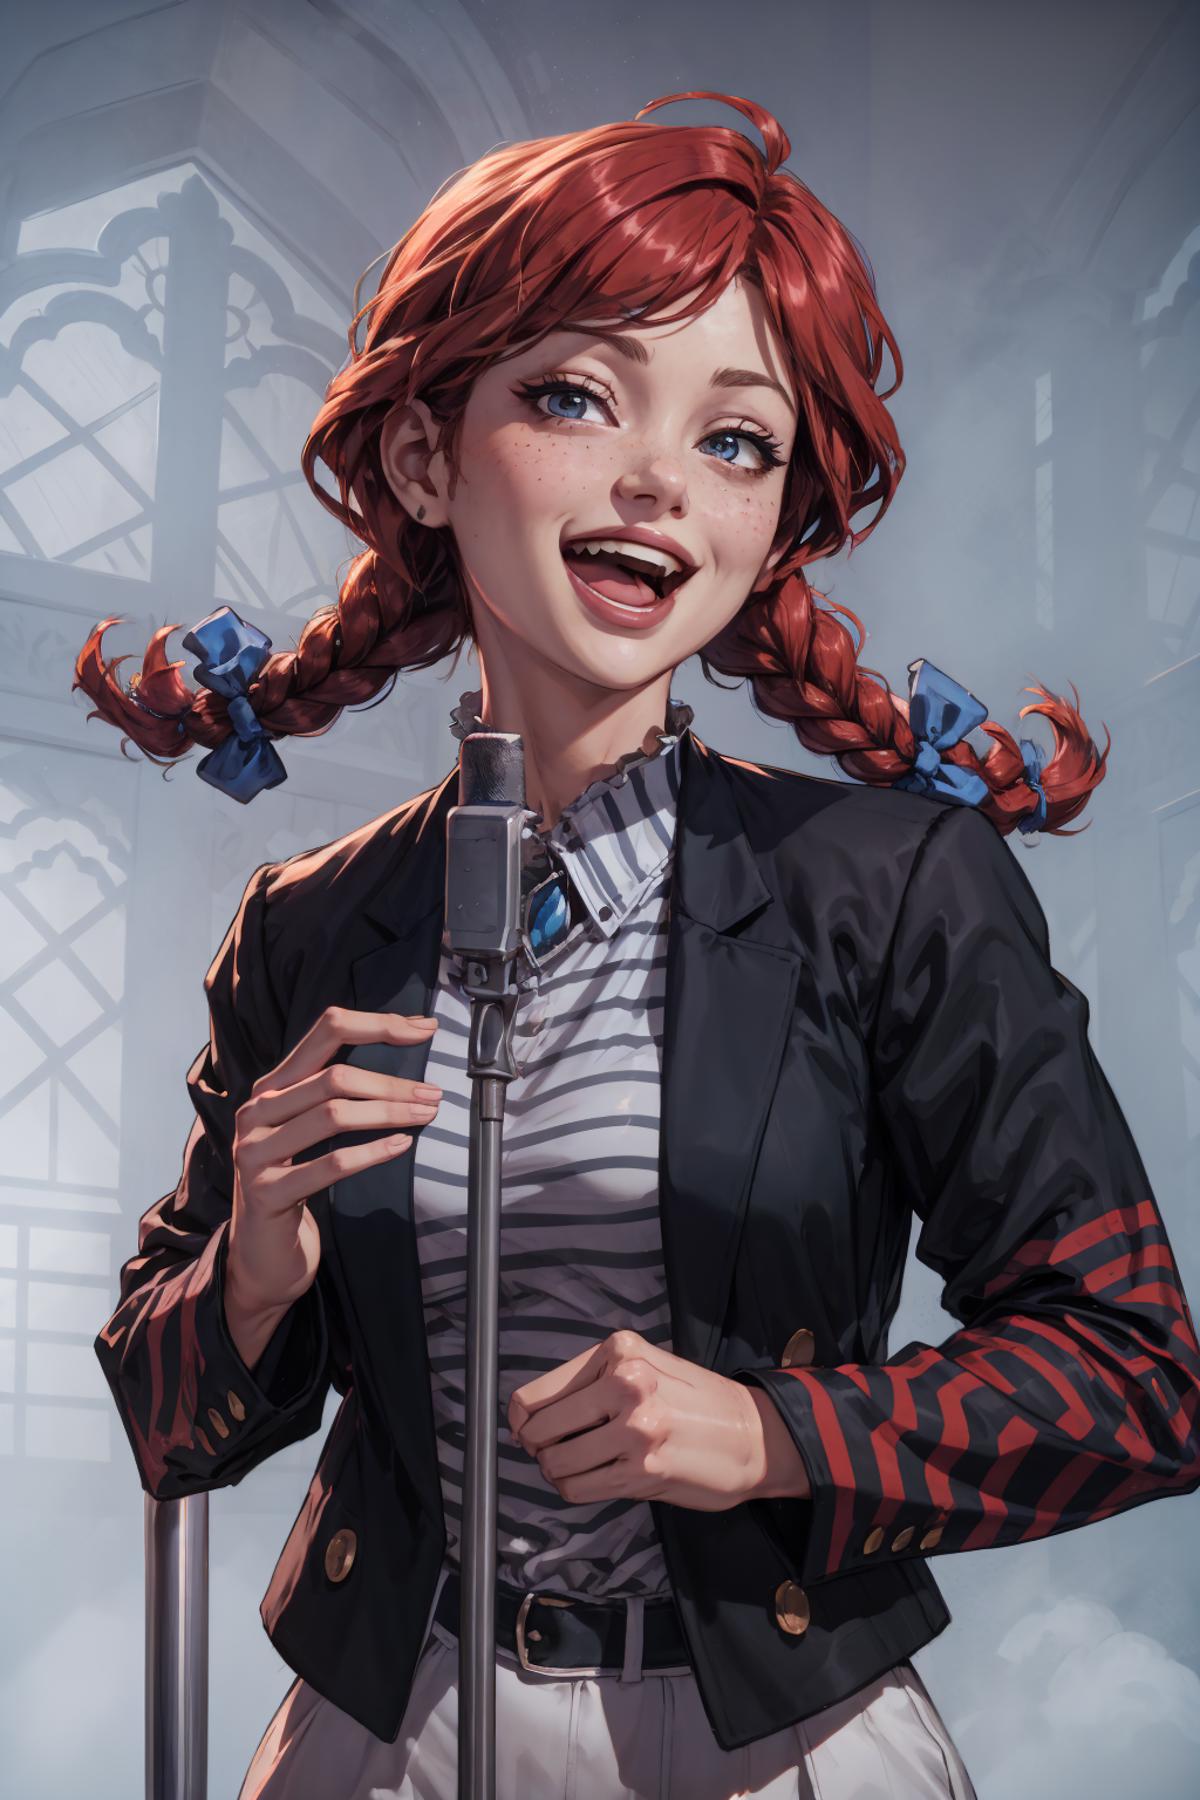 A cartoon illustration of a redheaded girl with blue eyes and red braids, wearing a black suit and striped shirt, singing into a microphone.